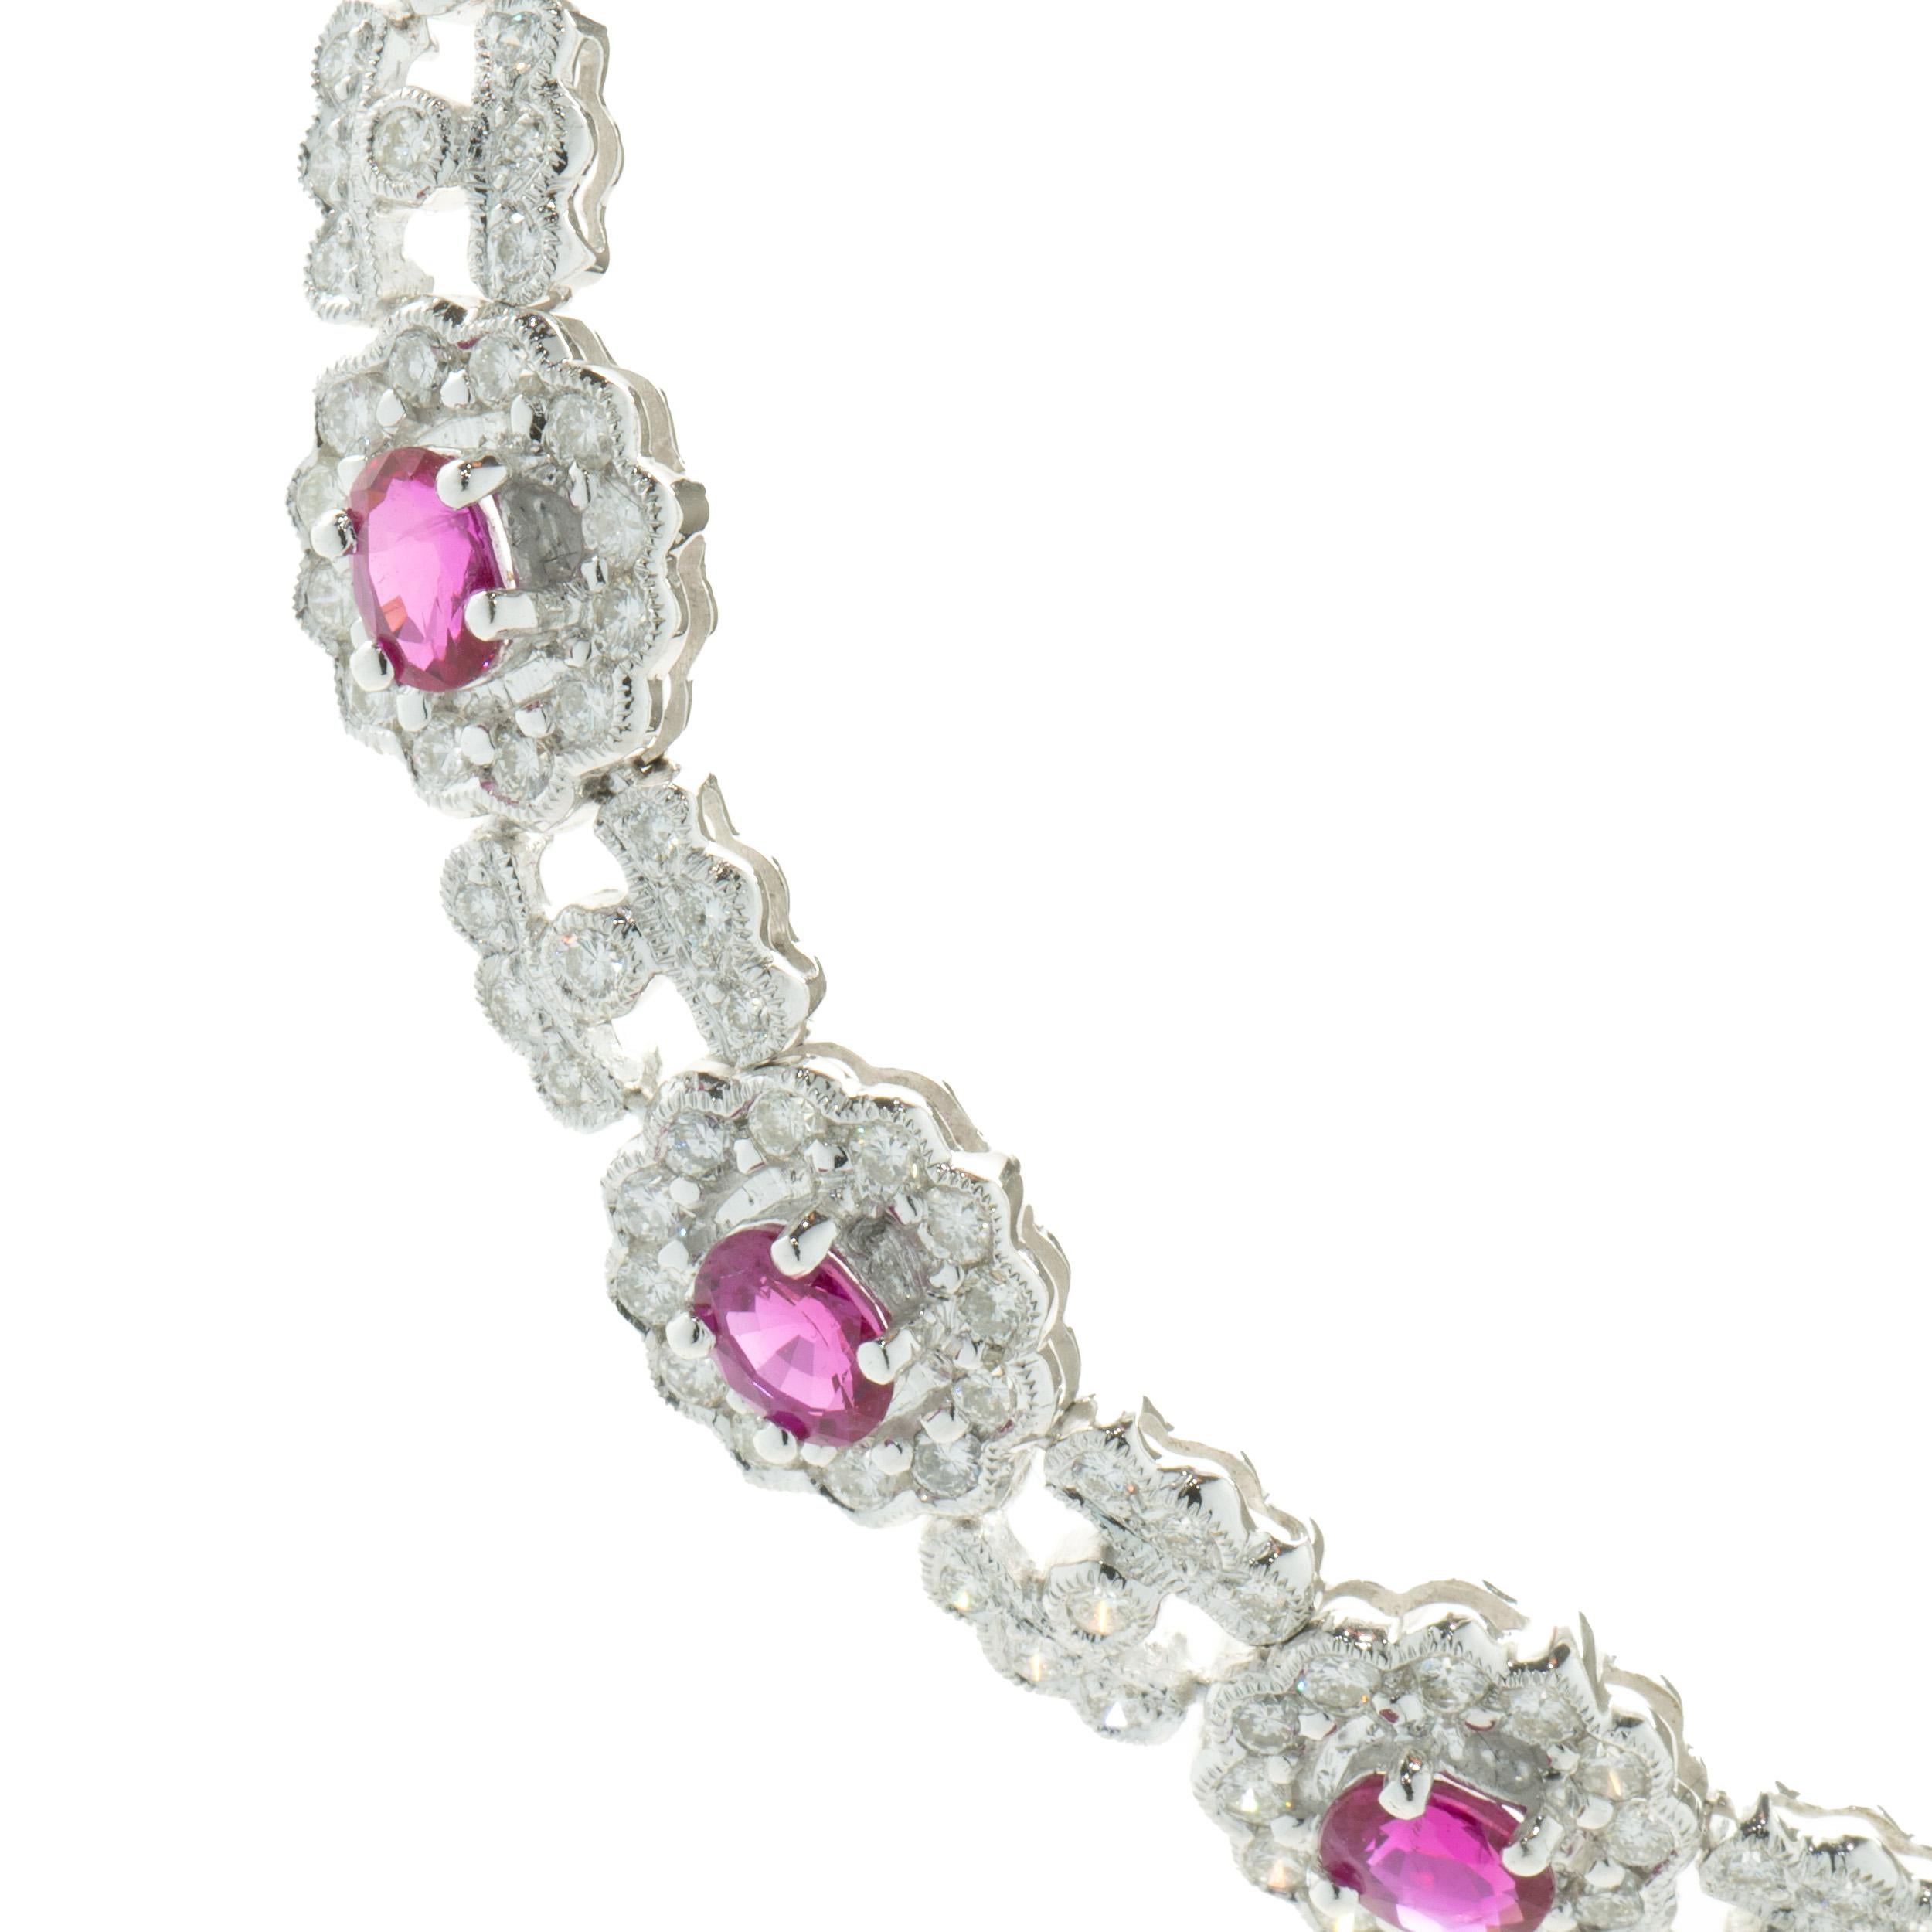 Designer: custom
Material: 18K white gold
Diamond: 178 round brilliant cut = 1.04cttw
Color: H
Clarity: SI1
Ruby: 9 oval cut = 1.71cttw
Dimensions: necklace measures 13-inches in length
Weight: 22.62 grams